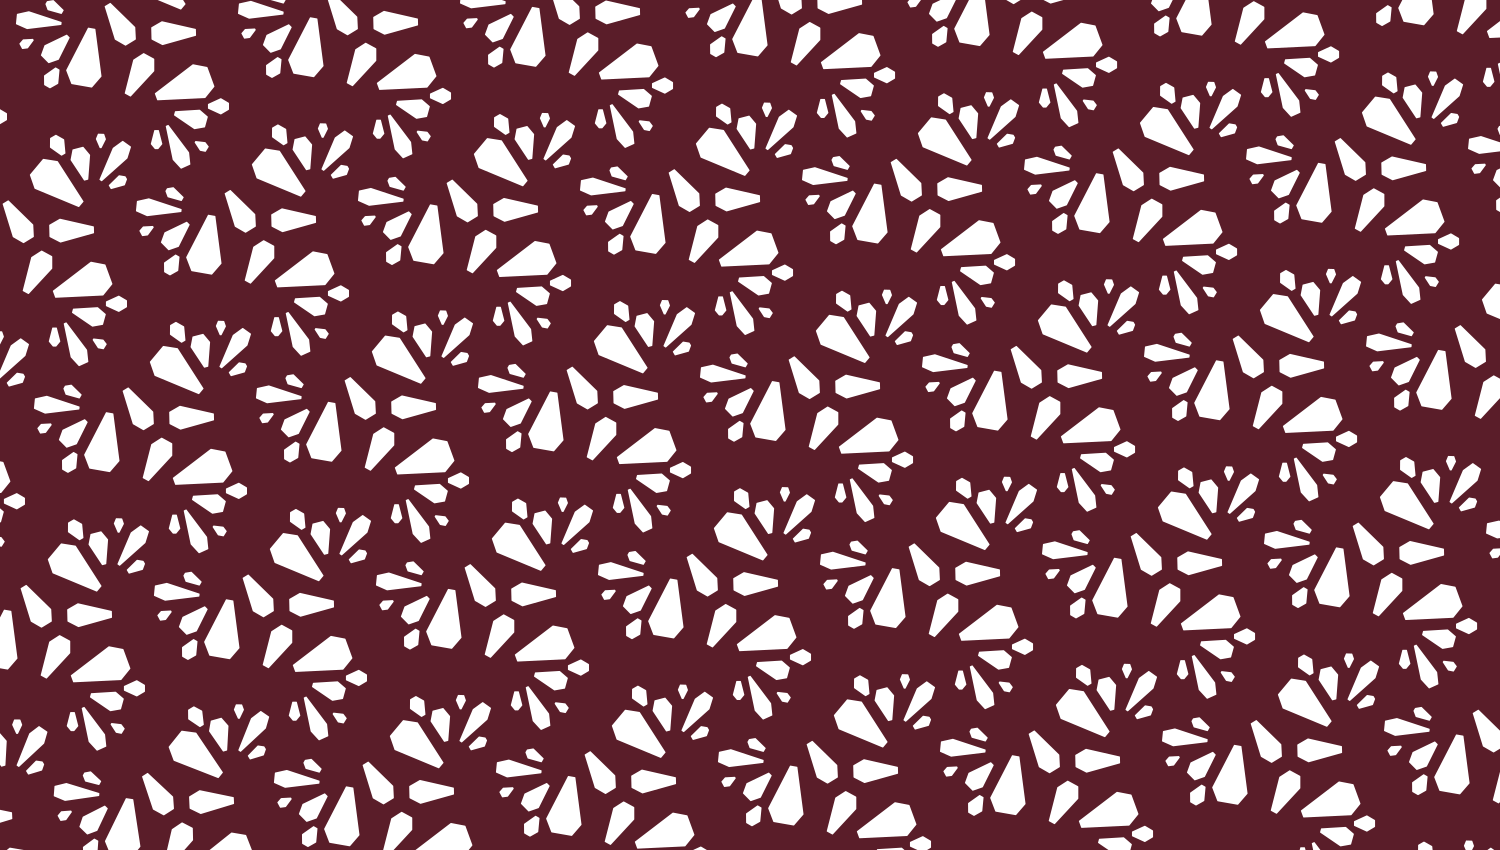 Parasoleil™ Antwerp© pattern displayed with a burgundy color overlay